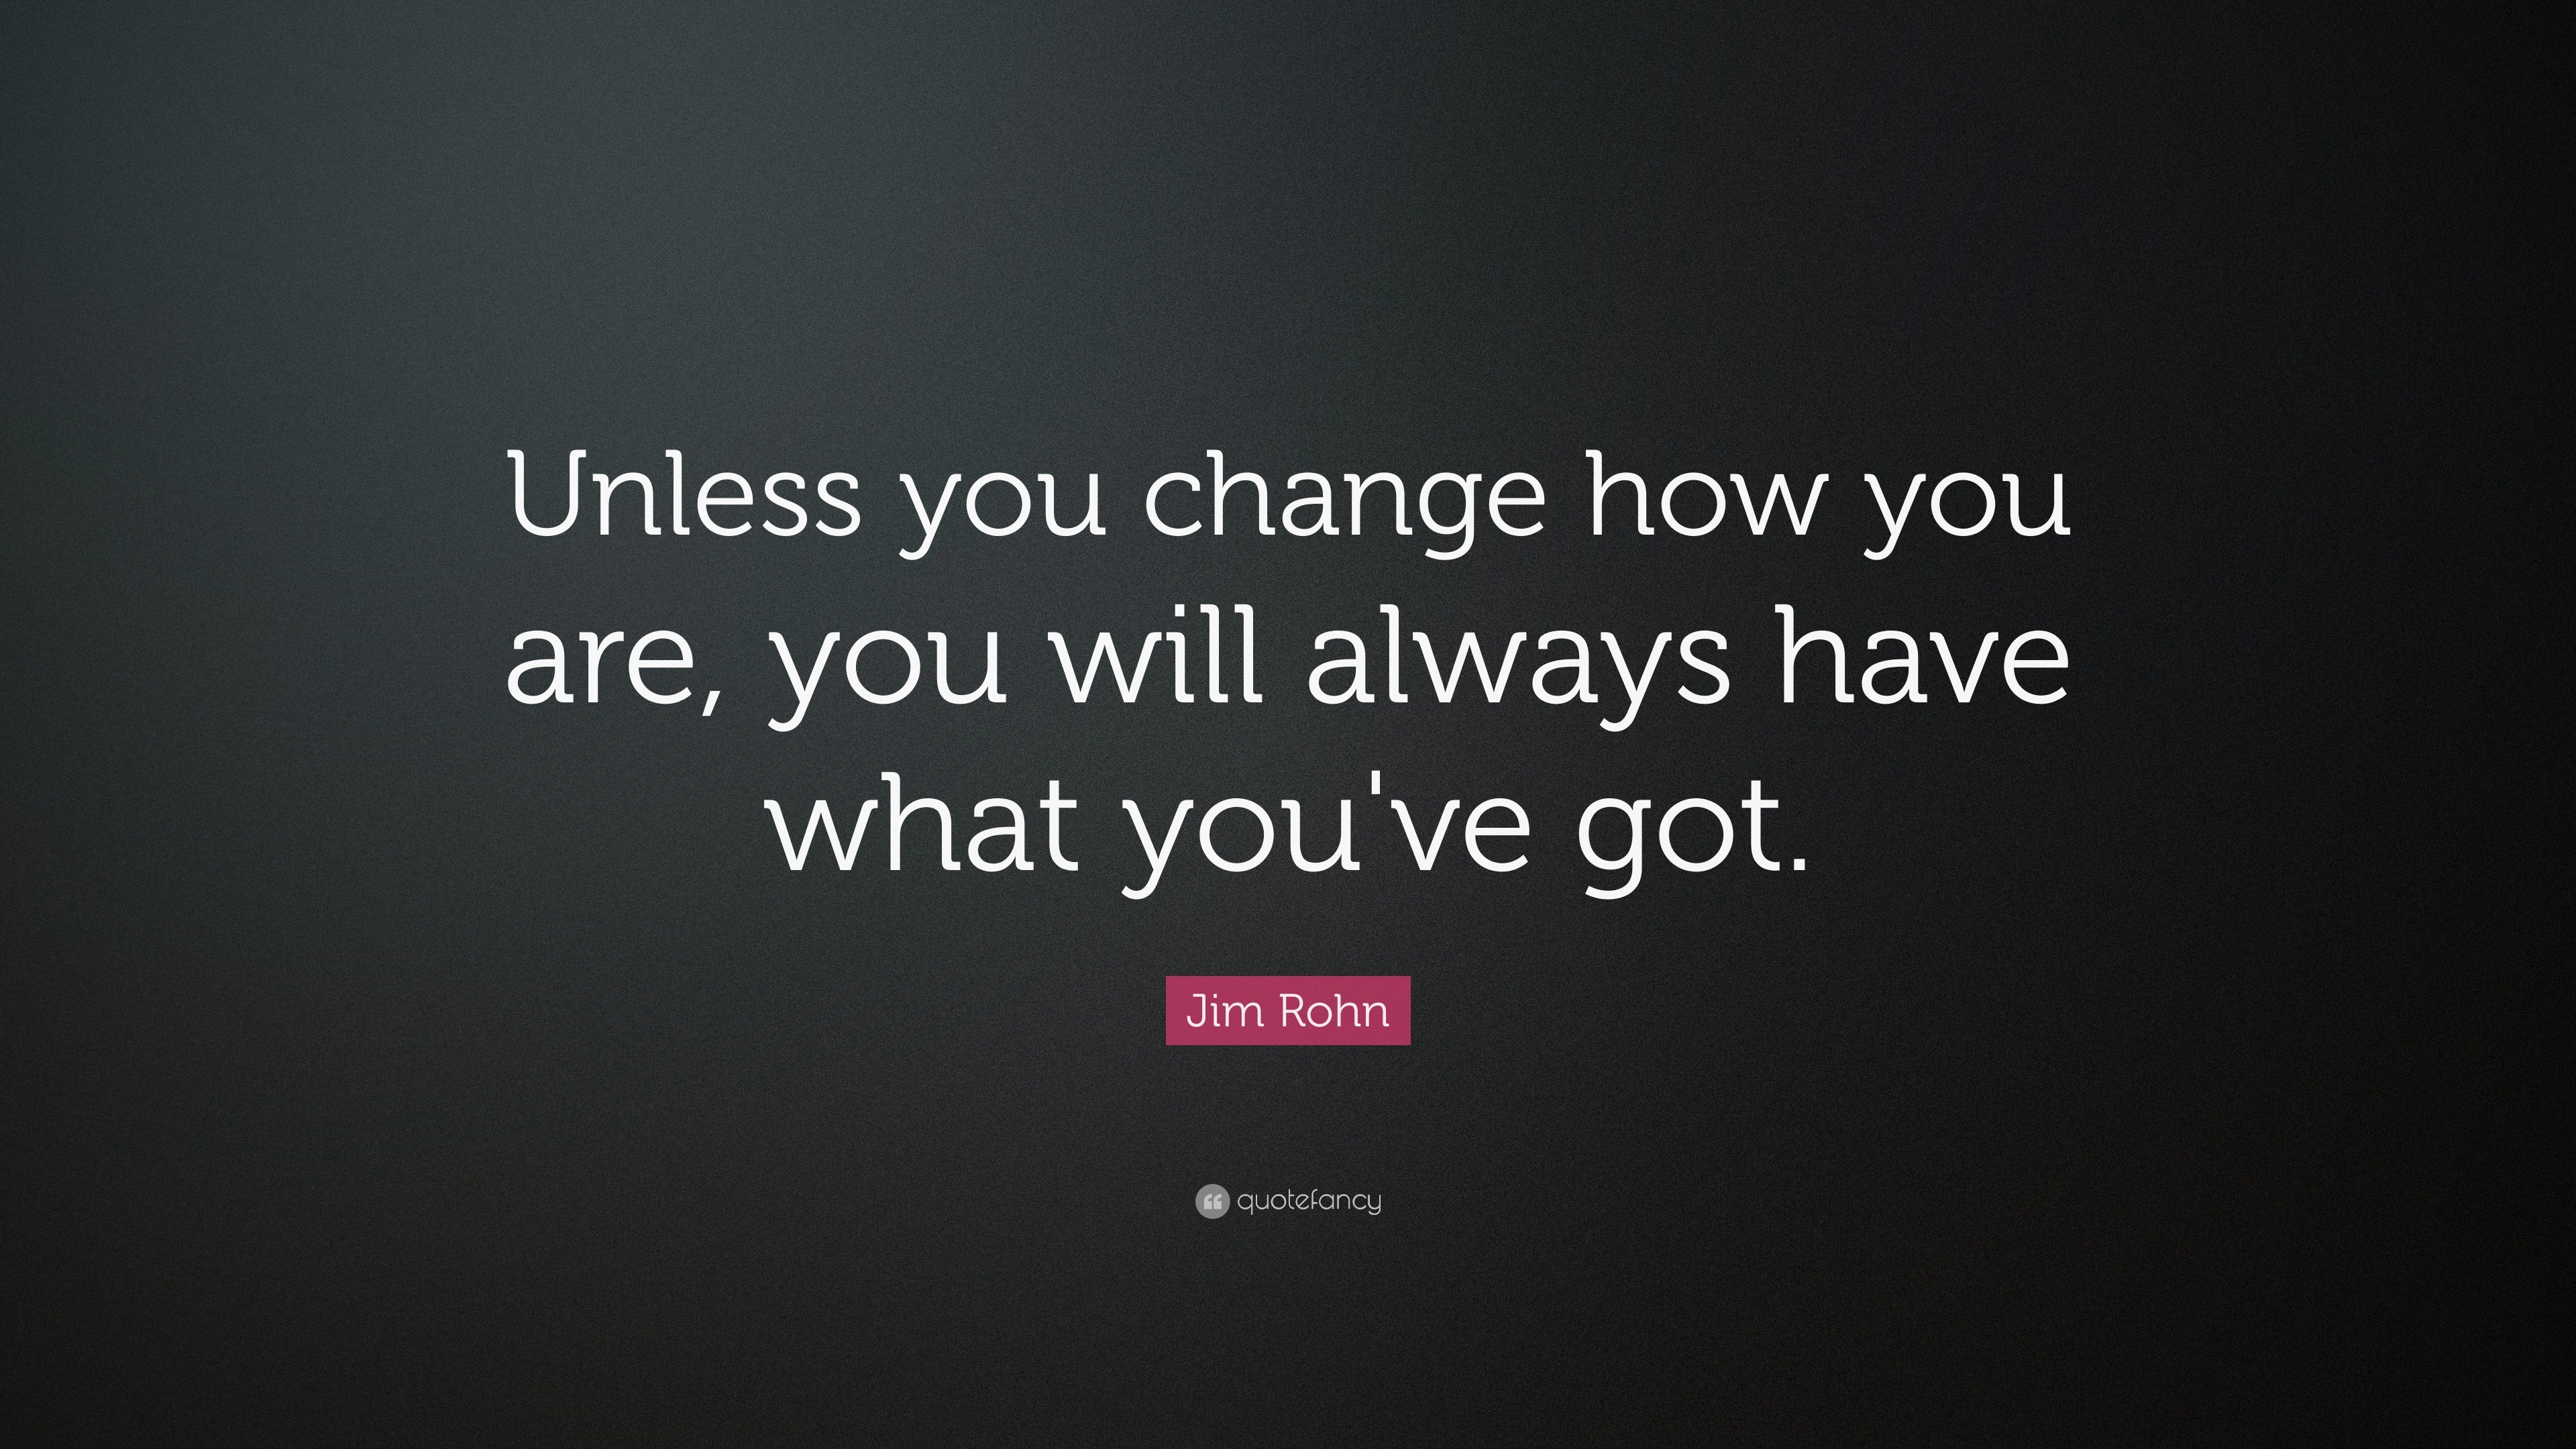 Jim Rohn Quote: “Unless you change how you are, you will always have ...